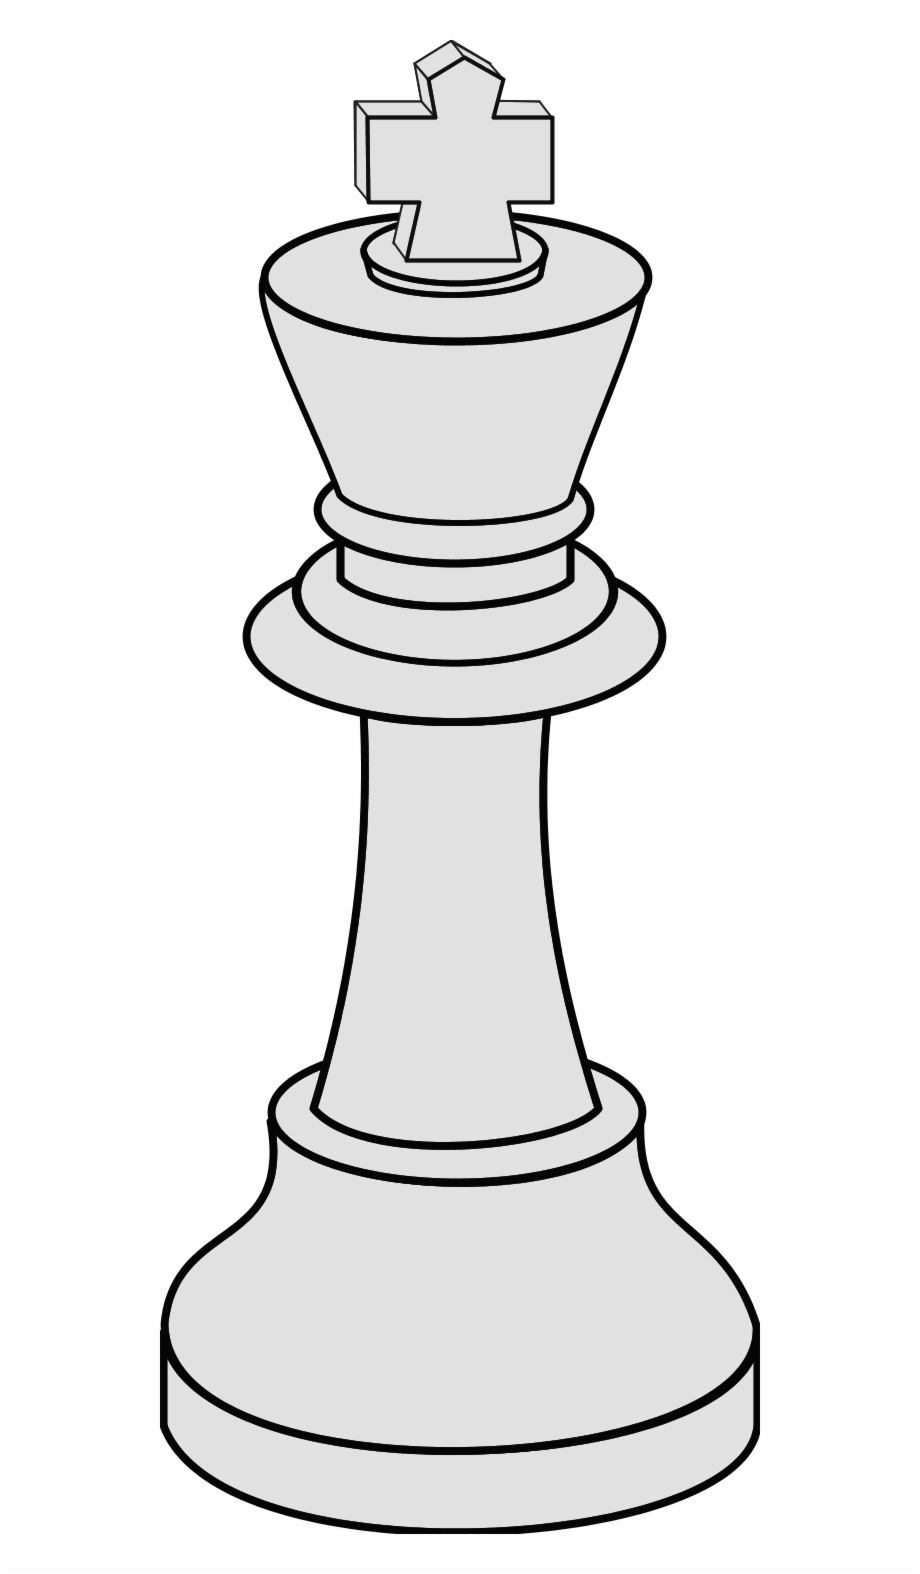 White King Chess King Chess Piece Outline